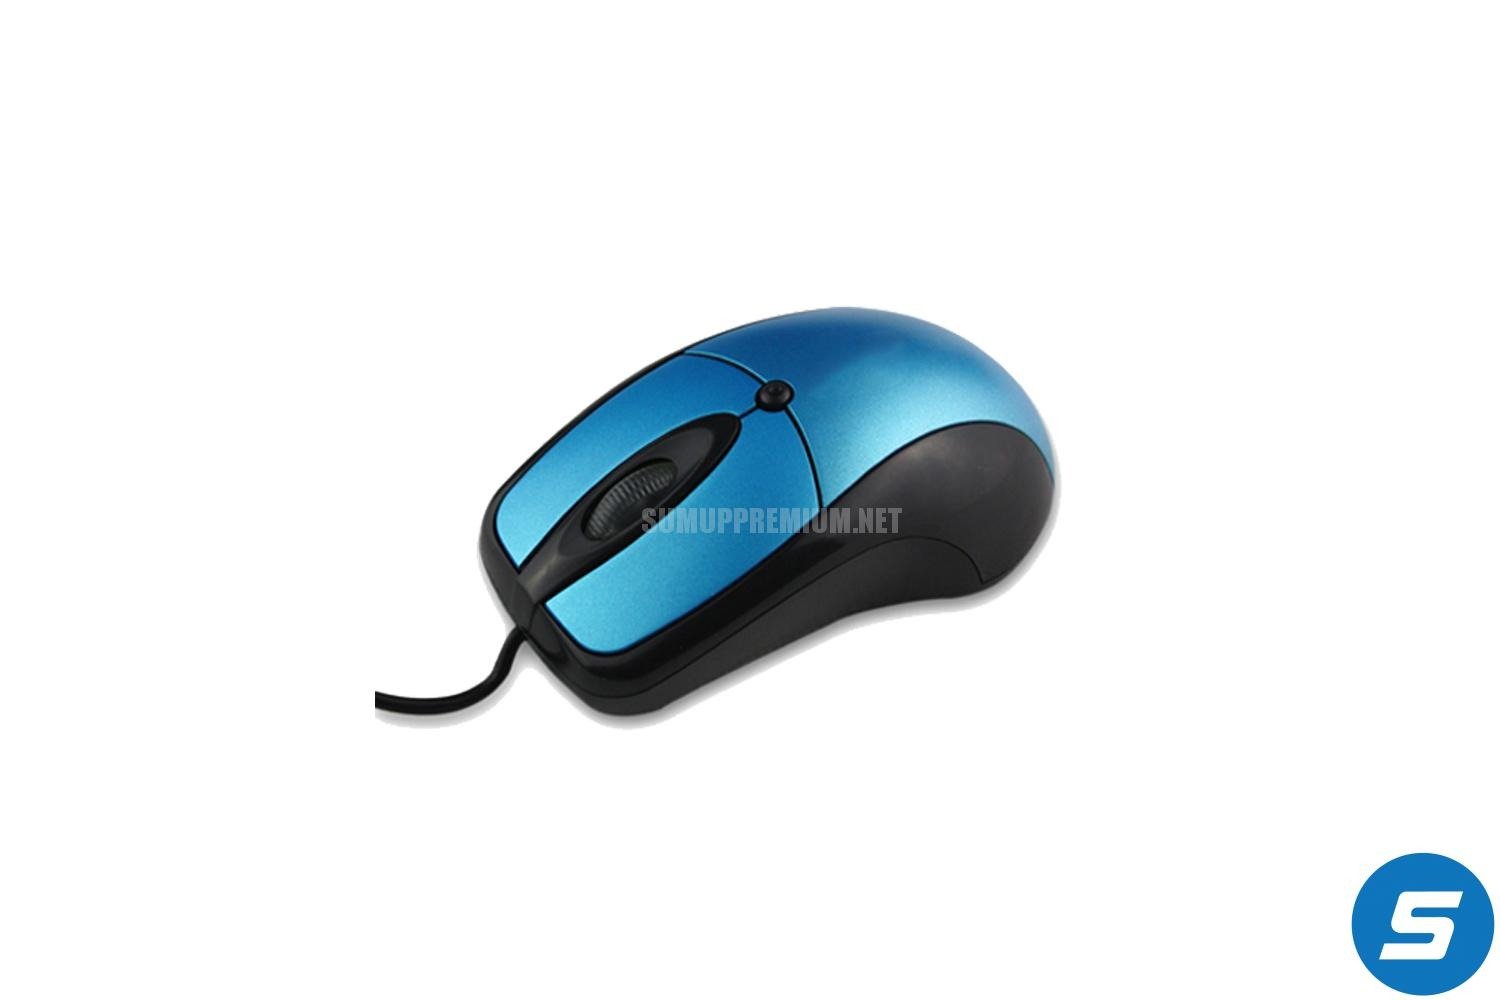 OM-04 Optical Mouse